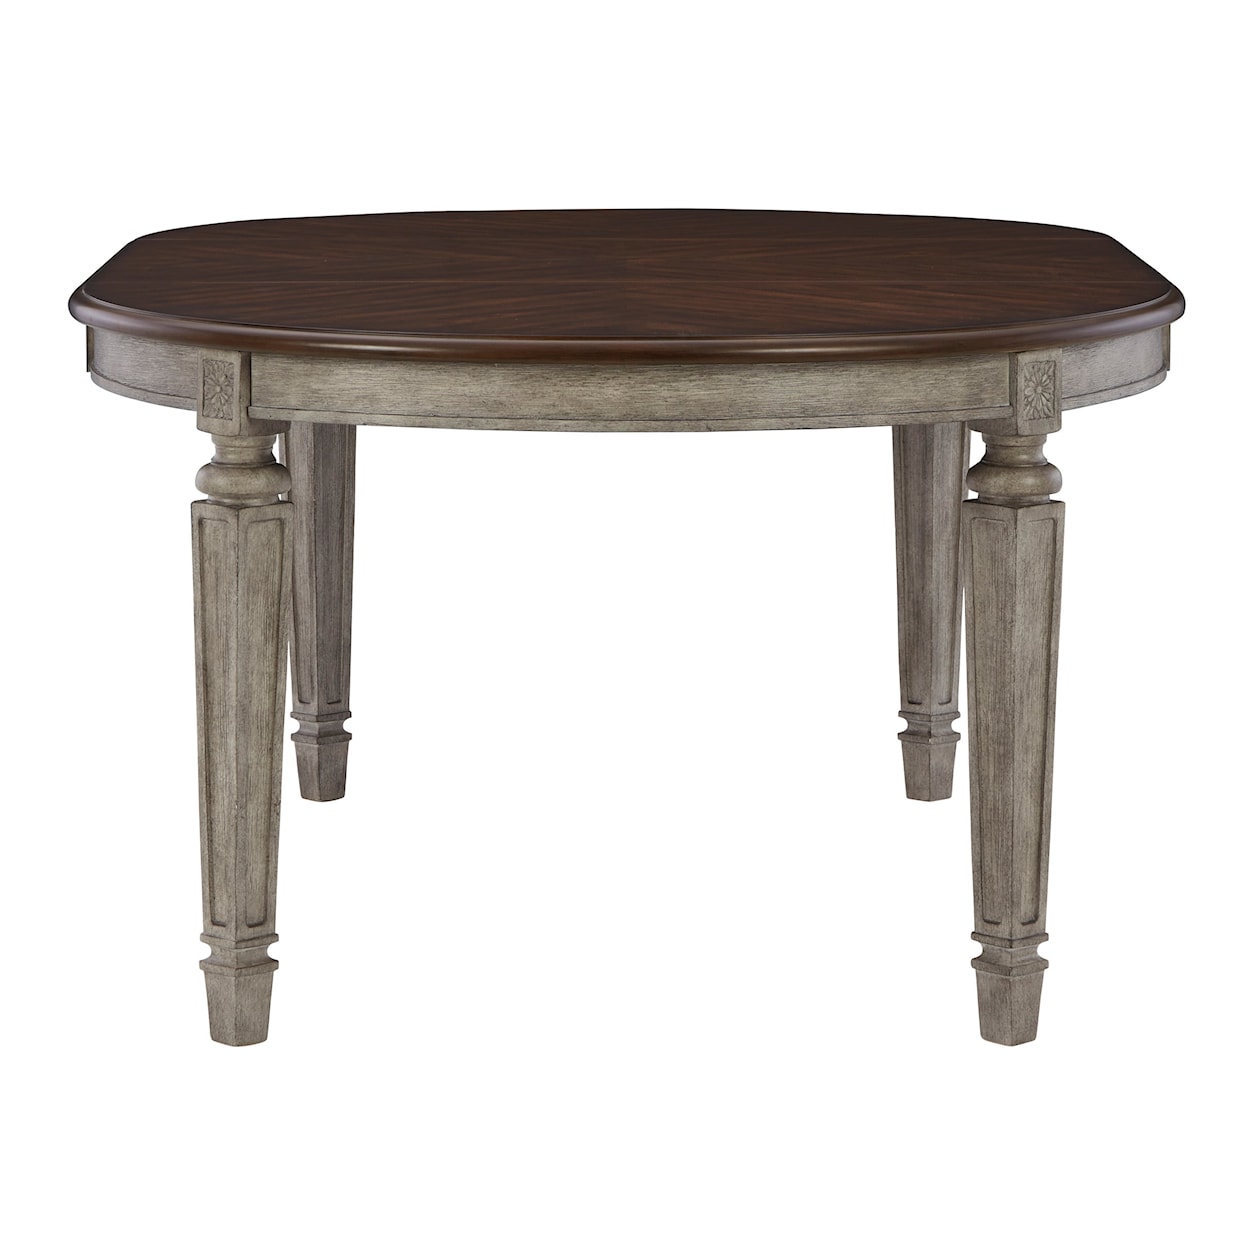 Ashley Furniture Signature Design Lodenbay Dining Table